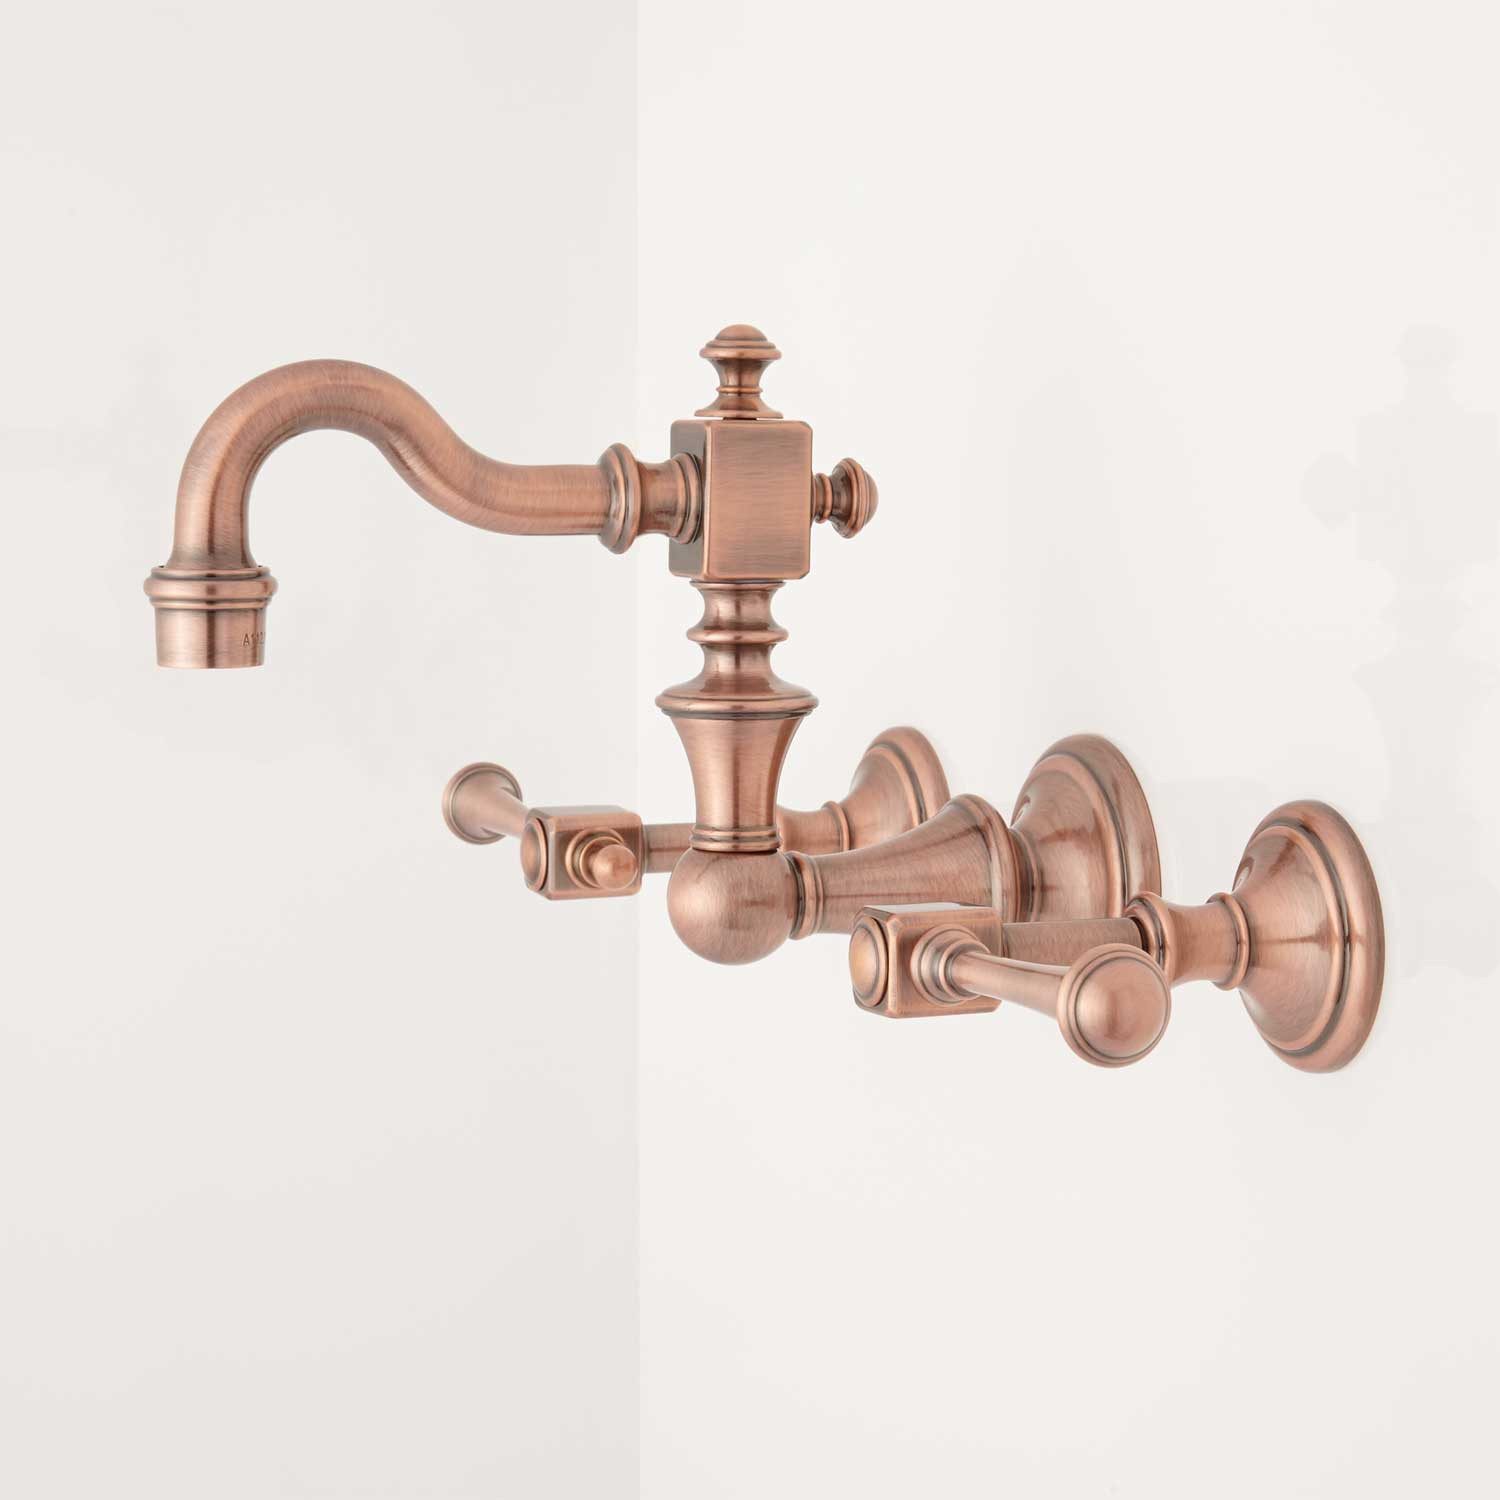 Kitchen Wall Mounted Faucets
 Vintage Wall Mount Kitchen Faucet Lever Handles Kitchen